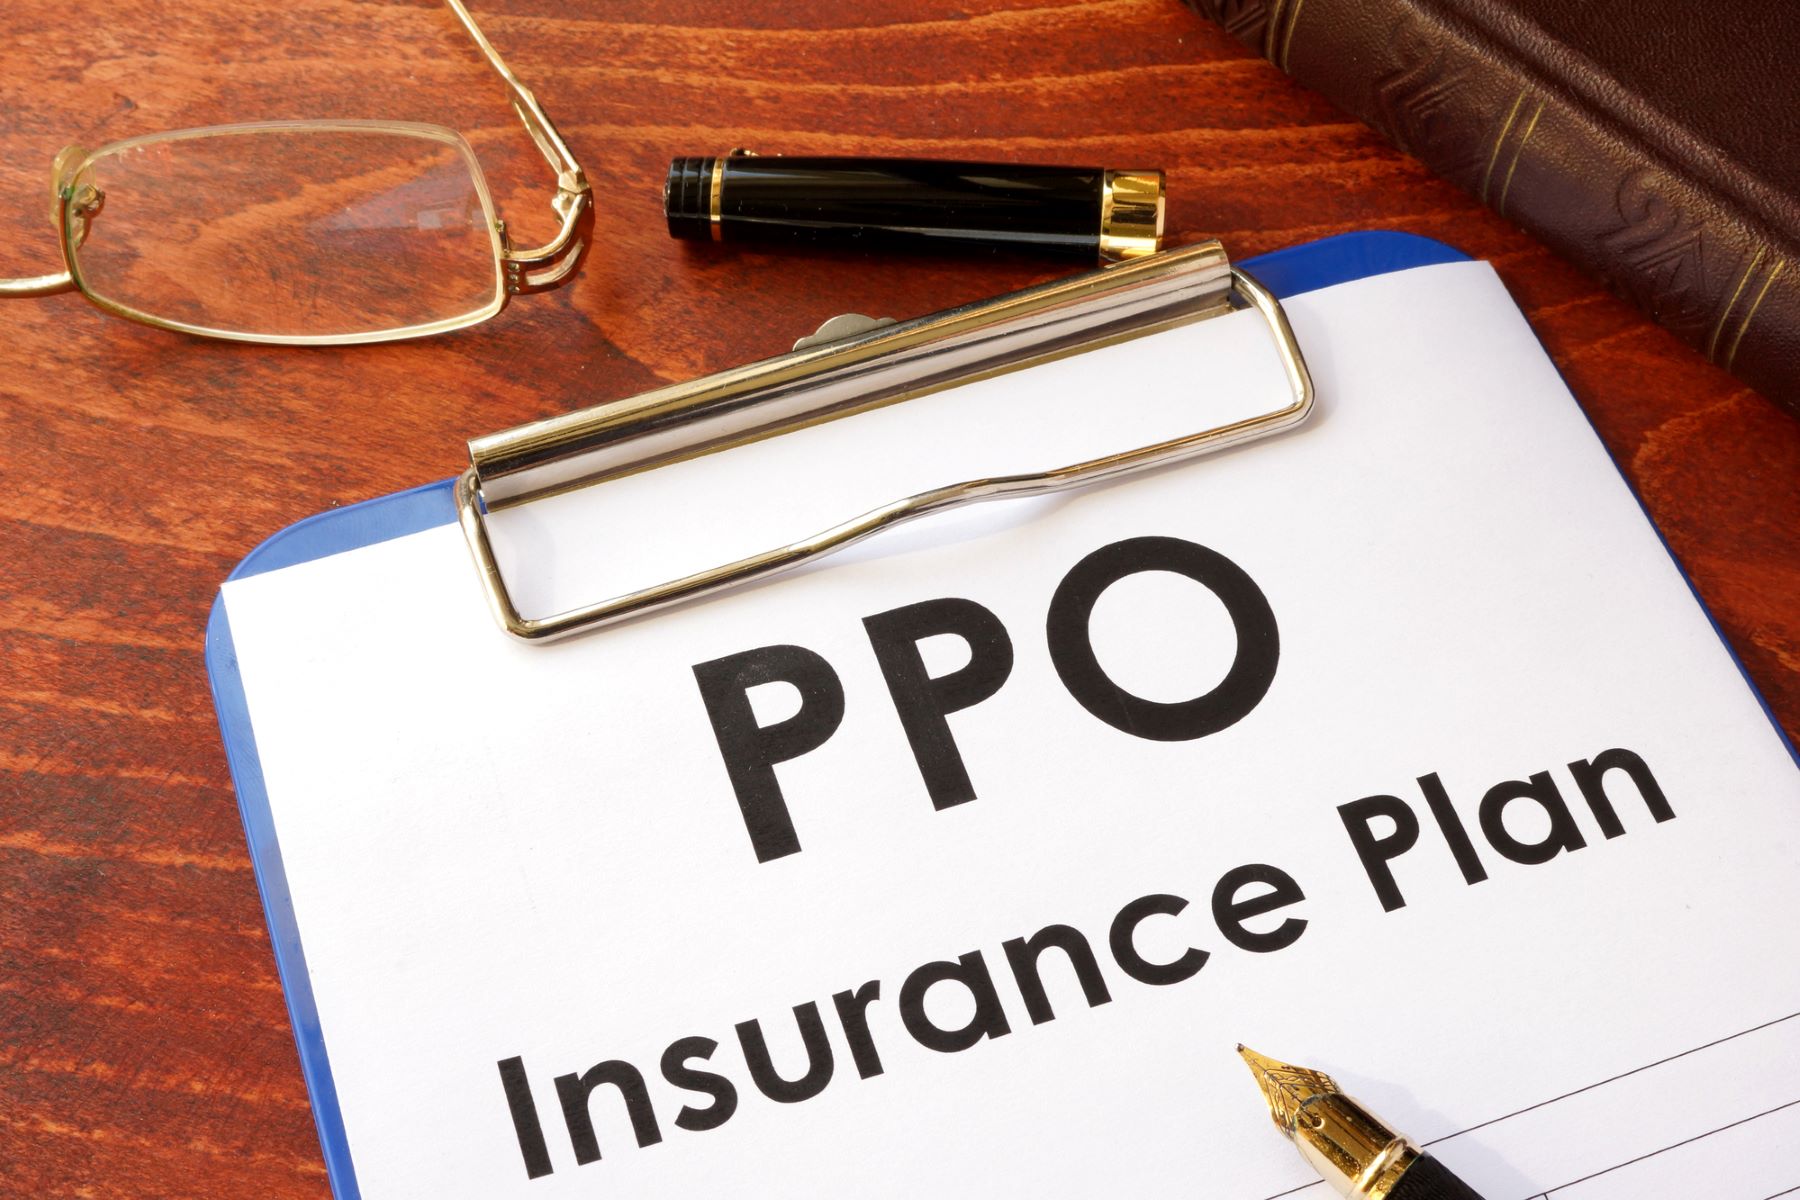 What Does PPO Insurance Mean?